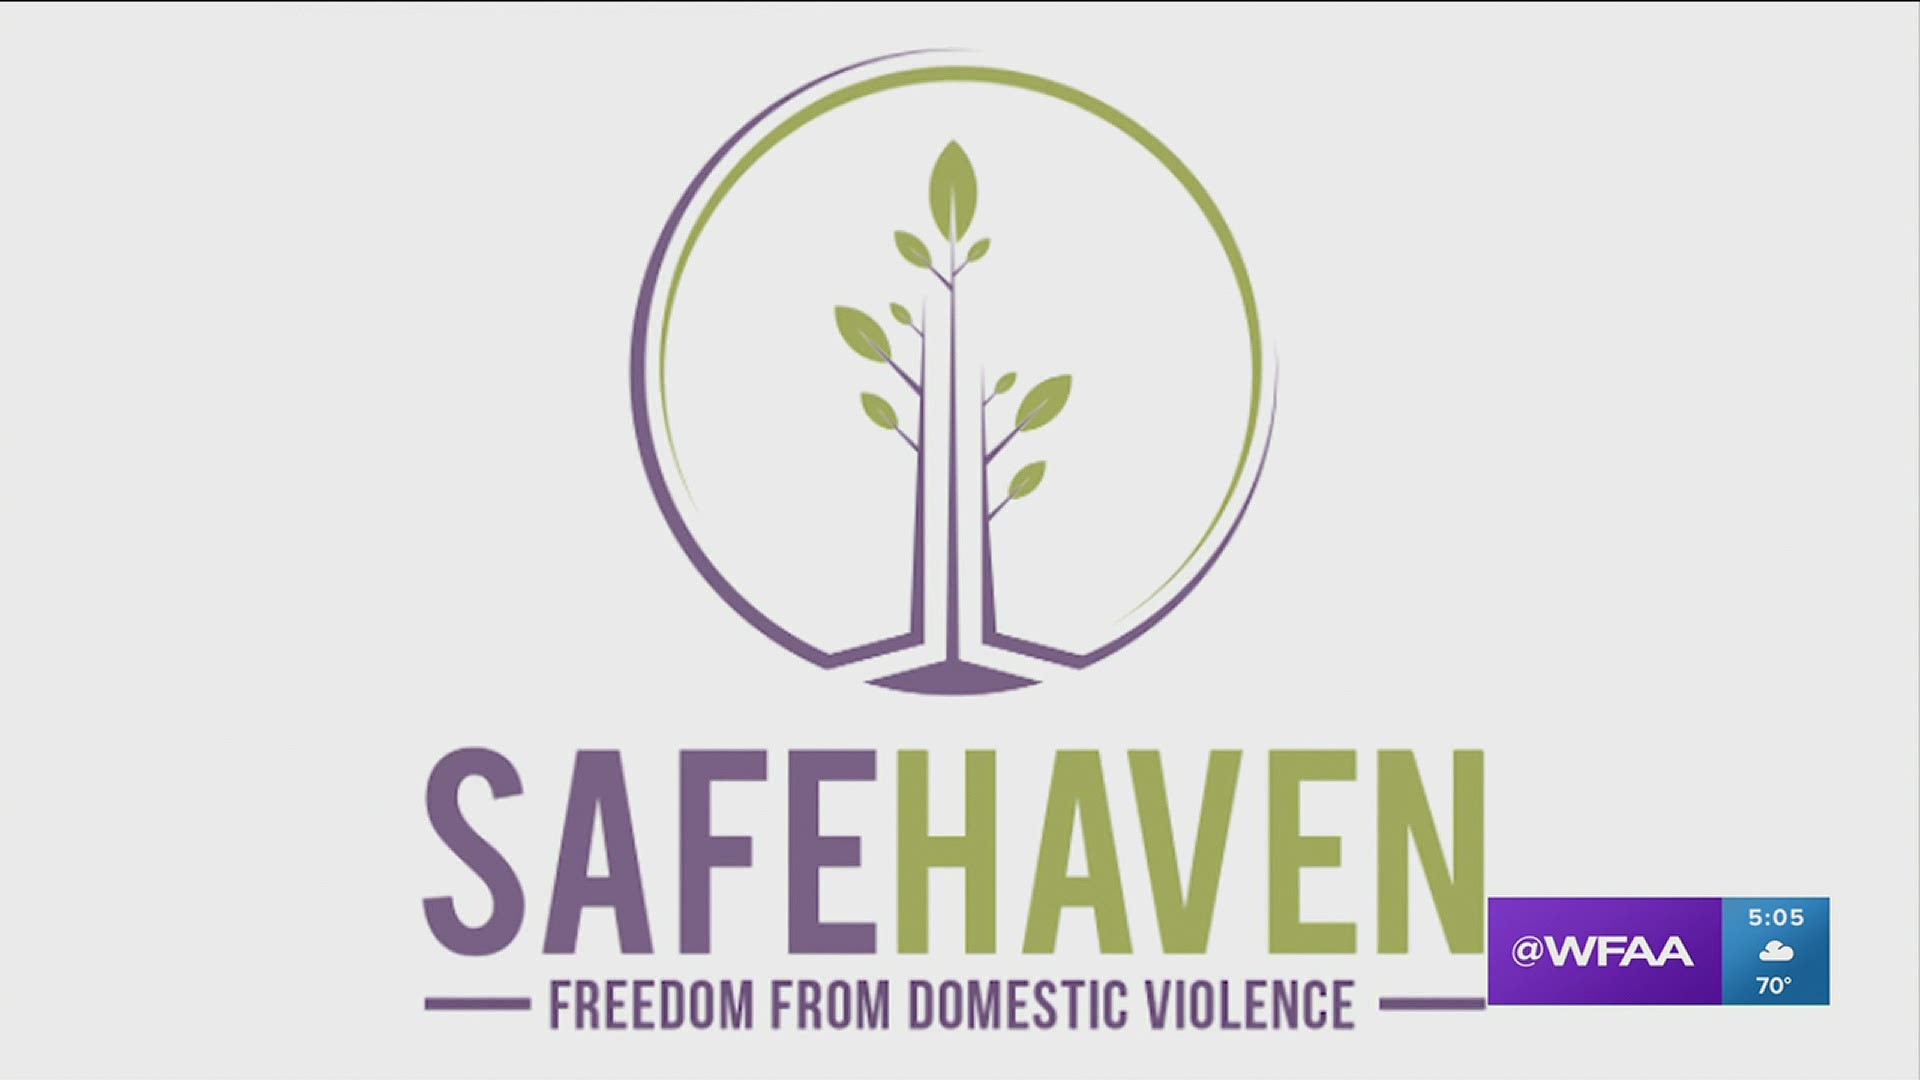 The nonprofit SafeHaven reminds anyone who's in danger, or who knows someone who is, to reach to SafeHaven and its 24-hour hotline: 1-877-701-7233.